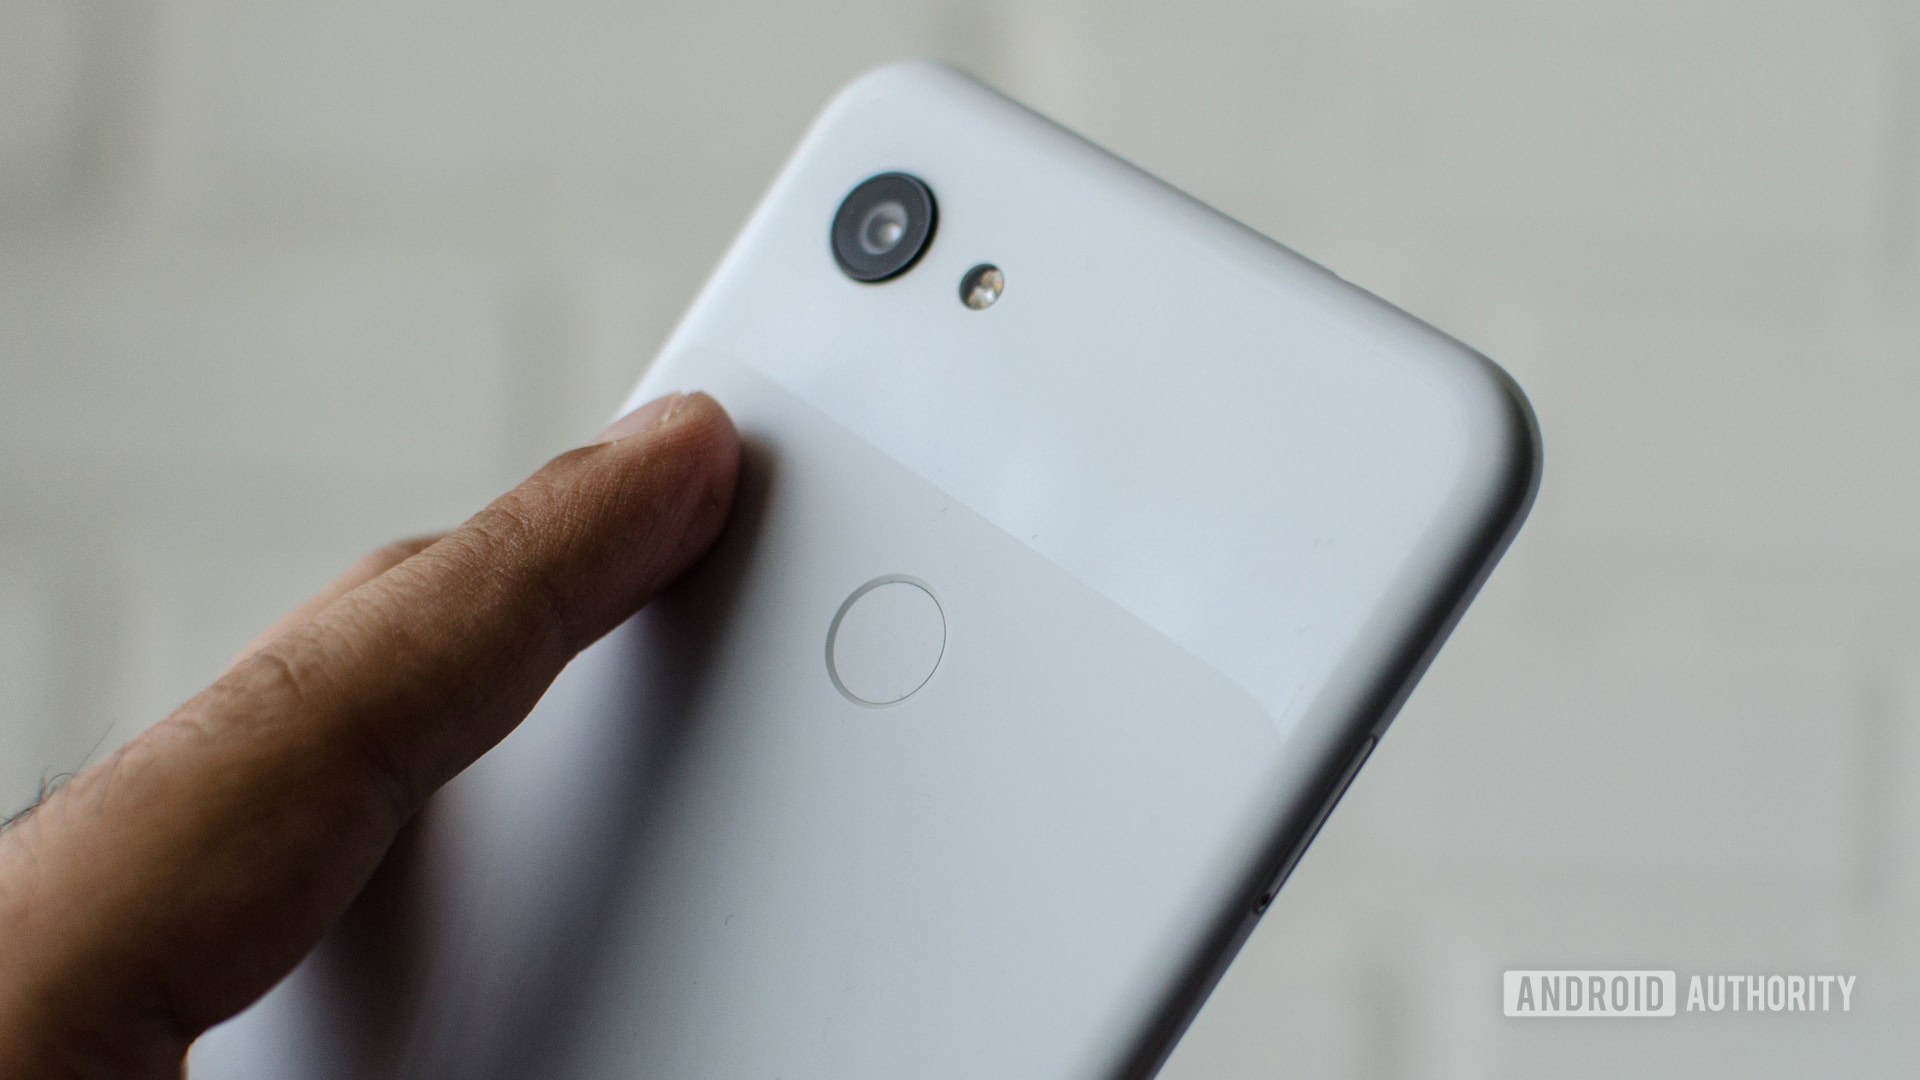 Google Pixel 3a XL review: Come for the camera, stay for the